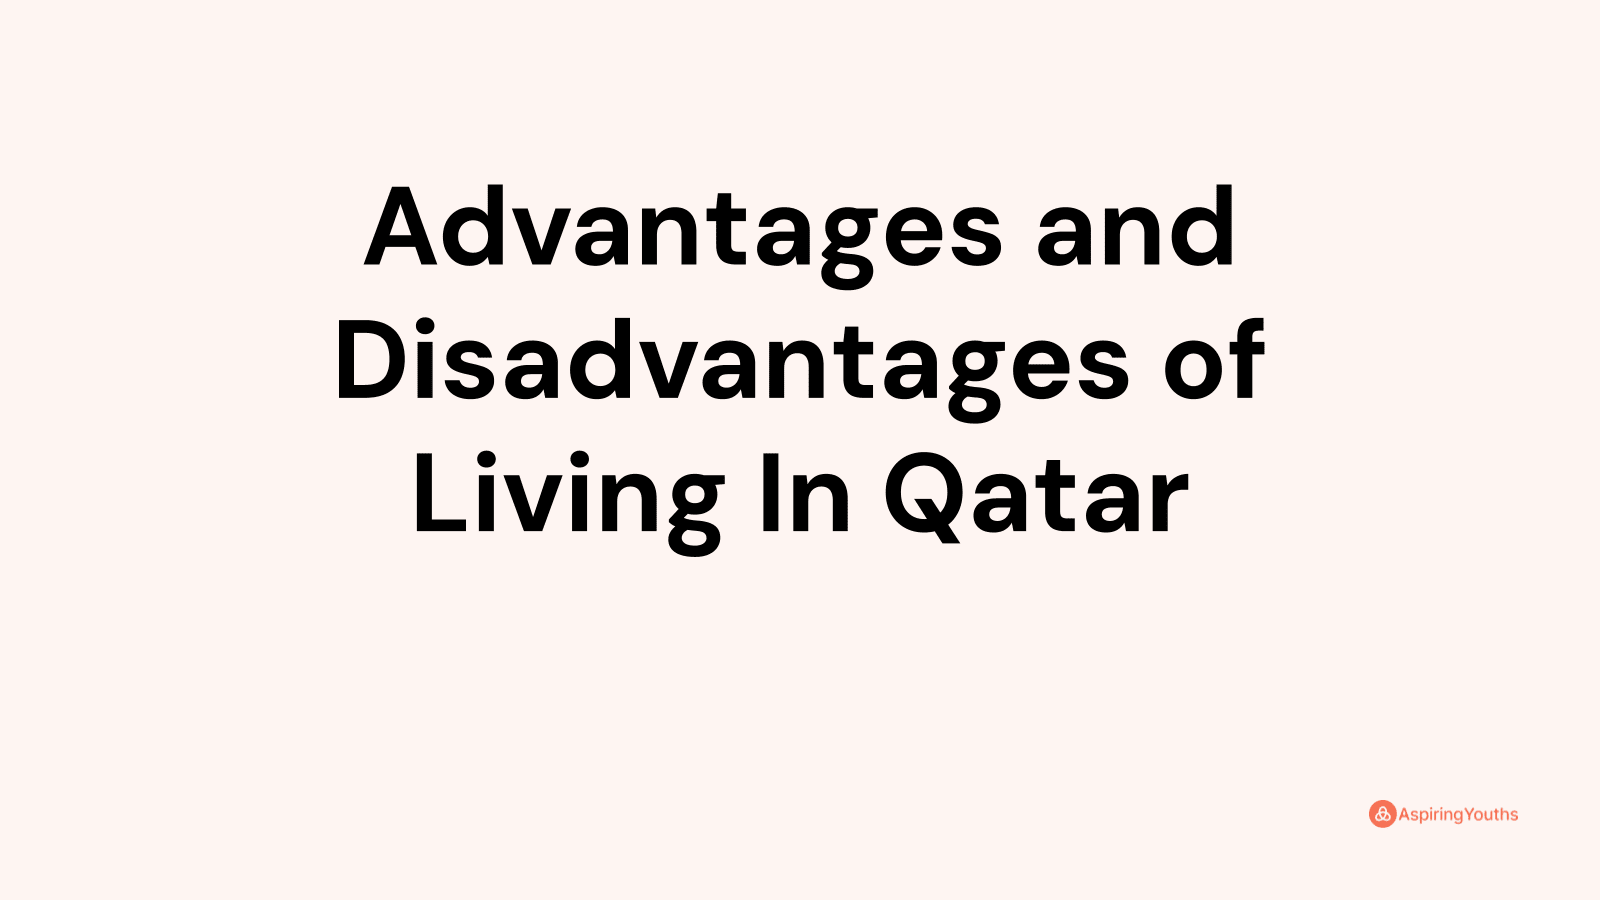 Advantages and disadvantages of Living In Qatar